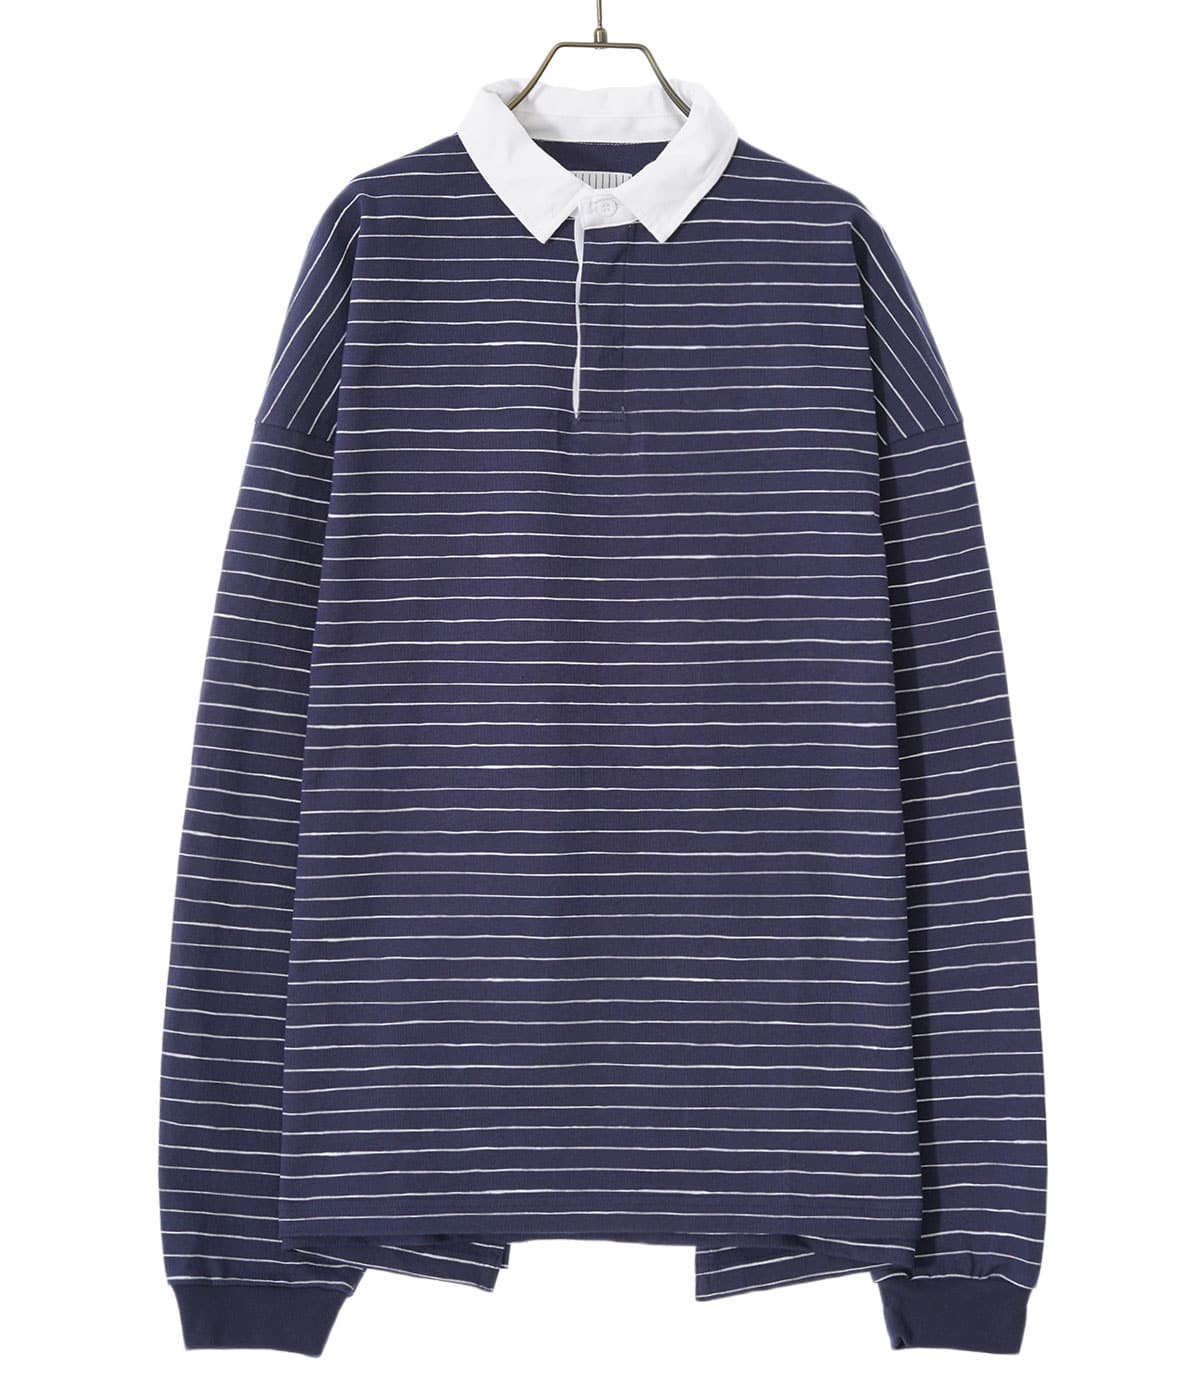 SIDE STRIPES RUGBY SHIRT | STRIPES FOR CREATIVE(ストライプ フォー